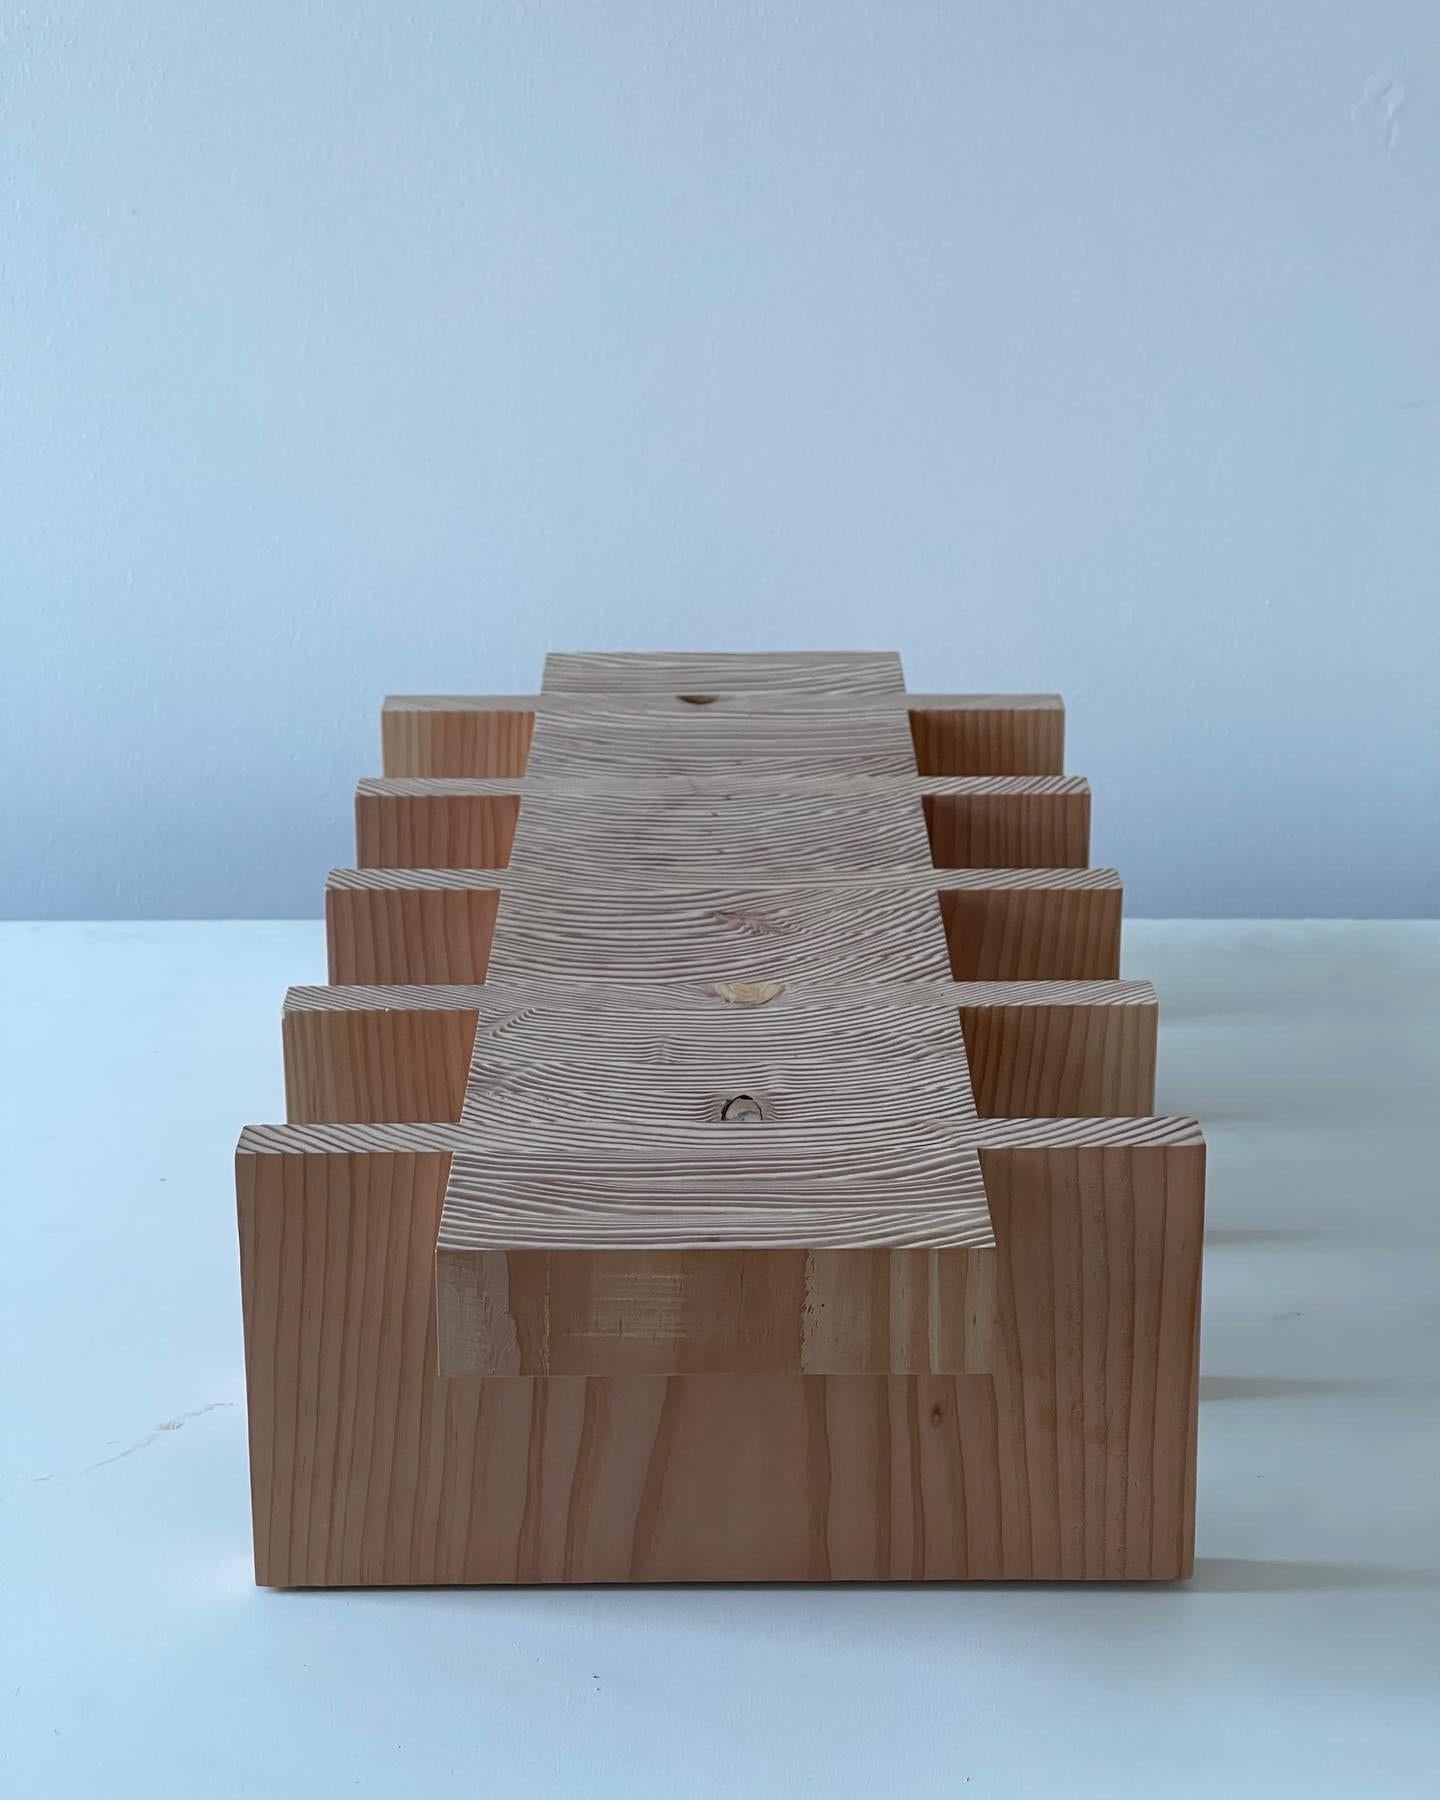 object made from wood